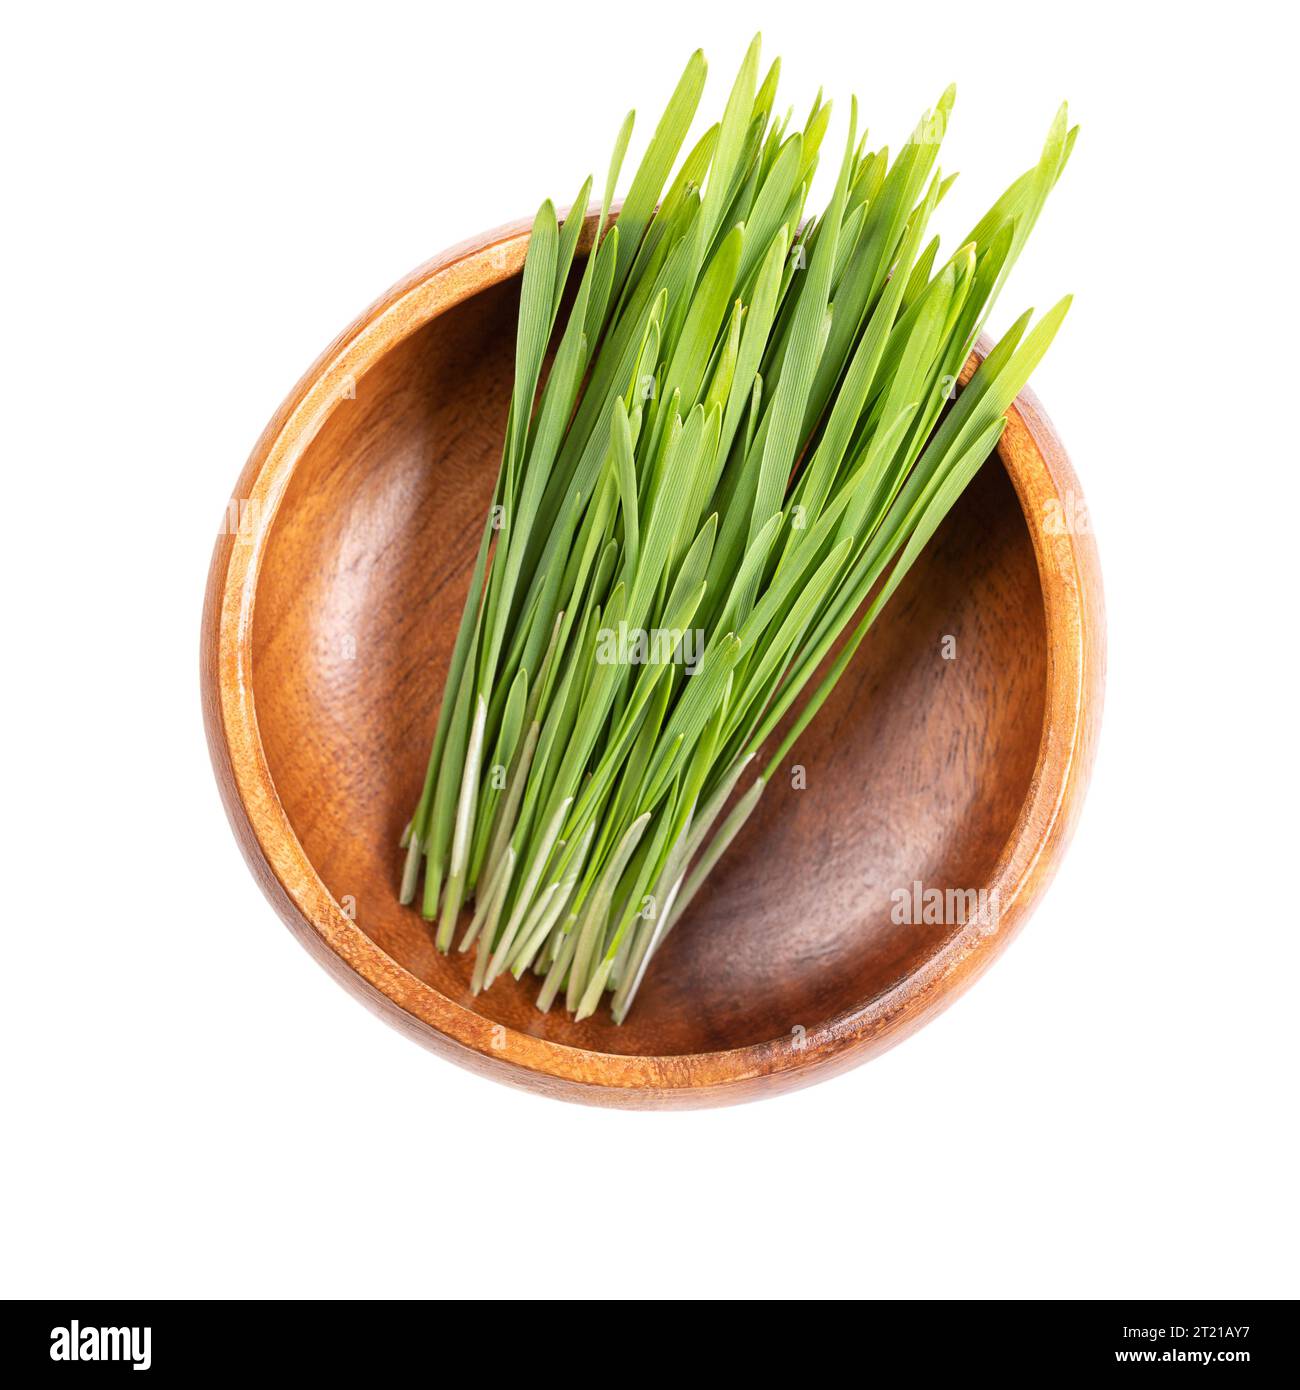 Fresh wheatgrass in wooden bowl. Sprouted first leaves of common wheat Triticum aestivum, used as food, drink, or dietary supplement. Stock Photo